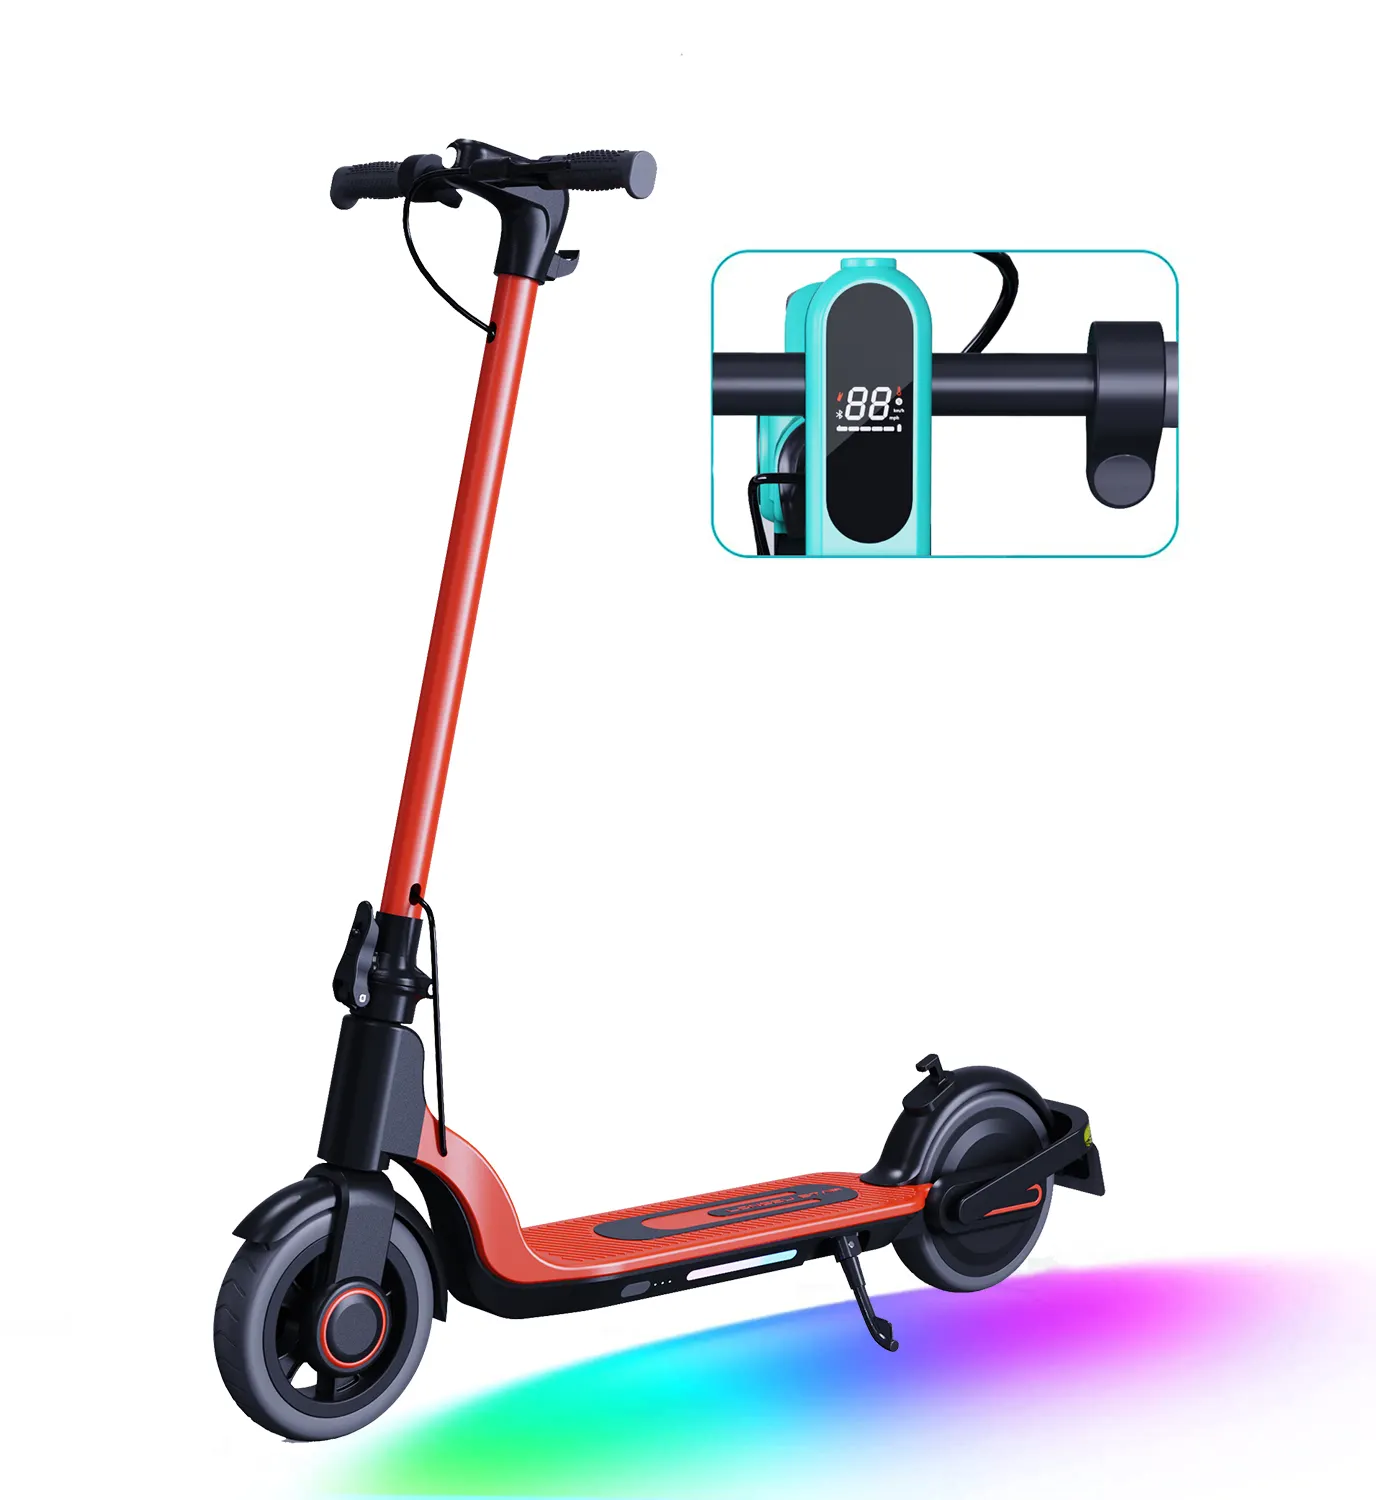 LCD display 8.5" wheel strong suspension scooter electric adult foldable Two Wheels Off Road electric scooters